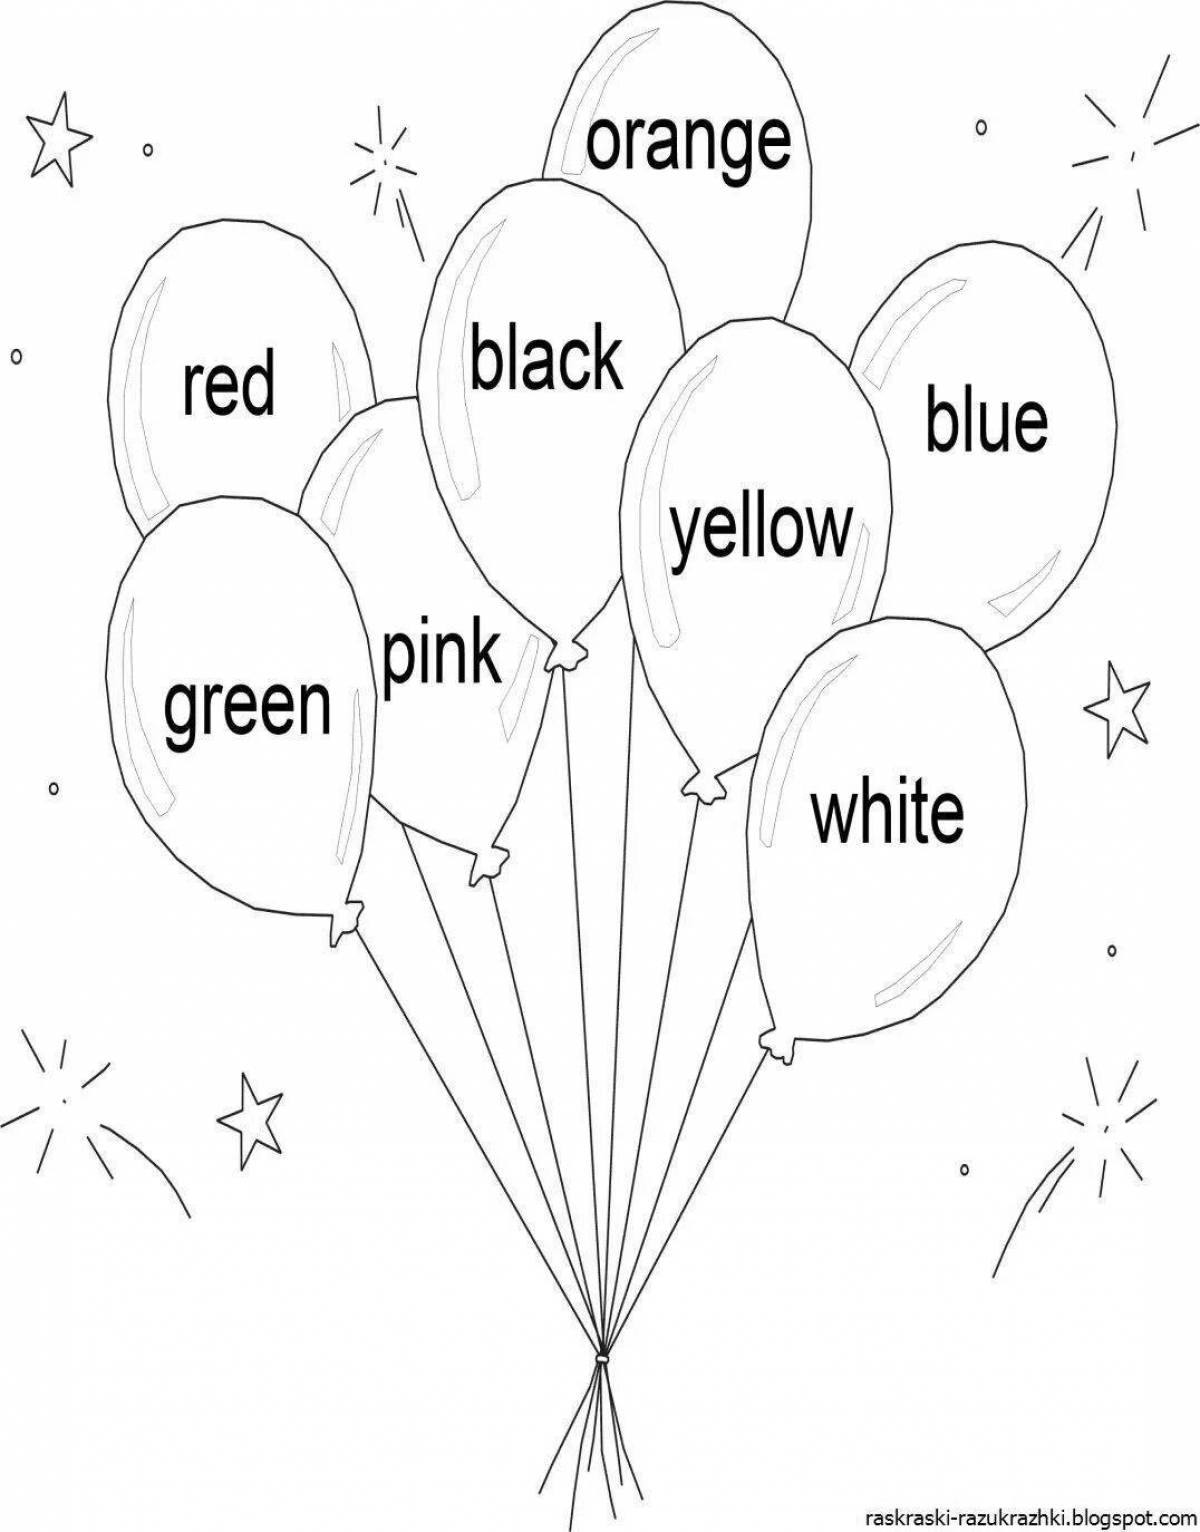 Colorful colorful glowing coloring book english colors